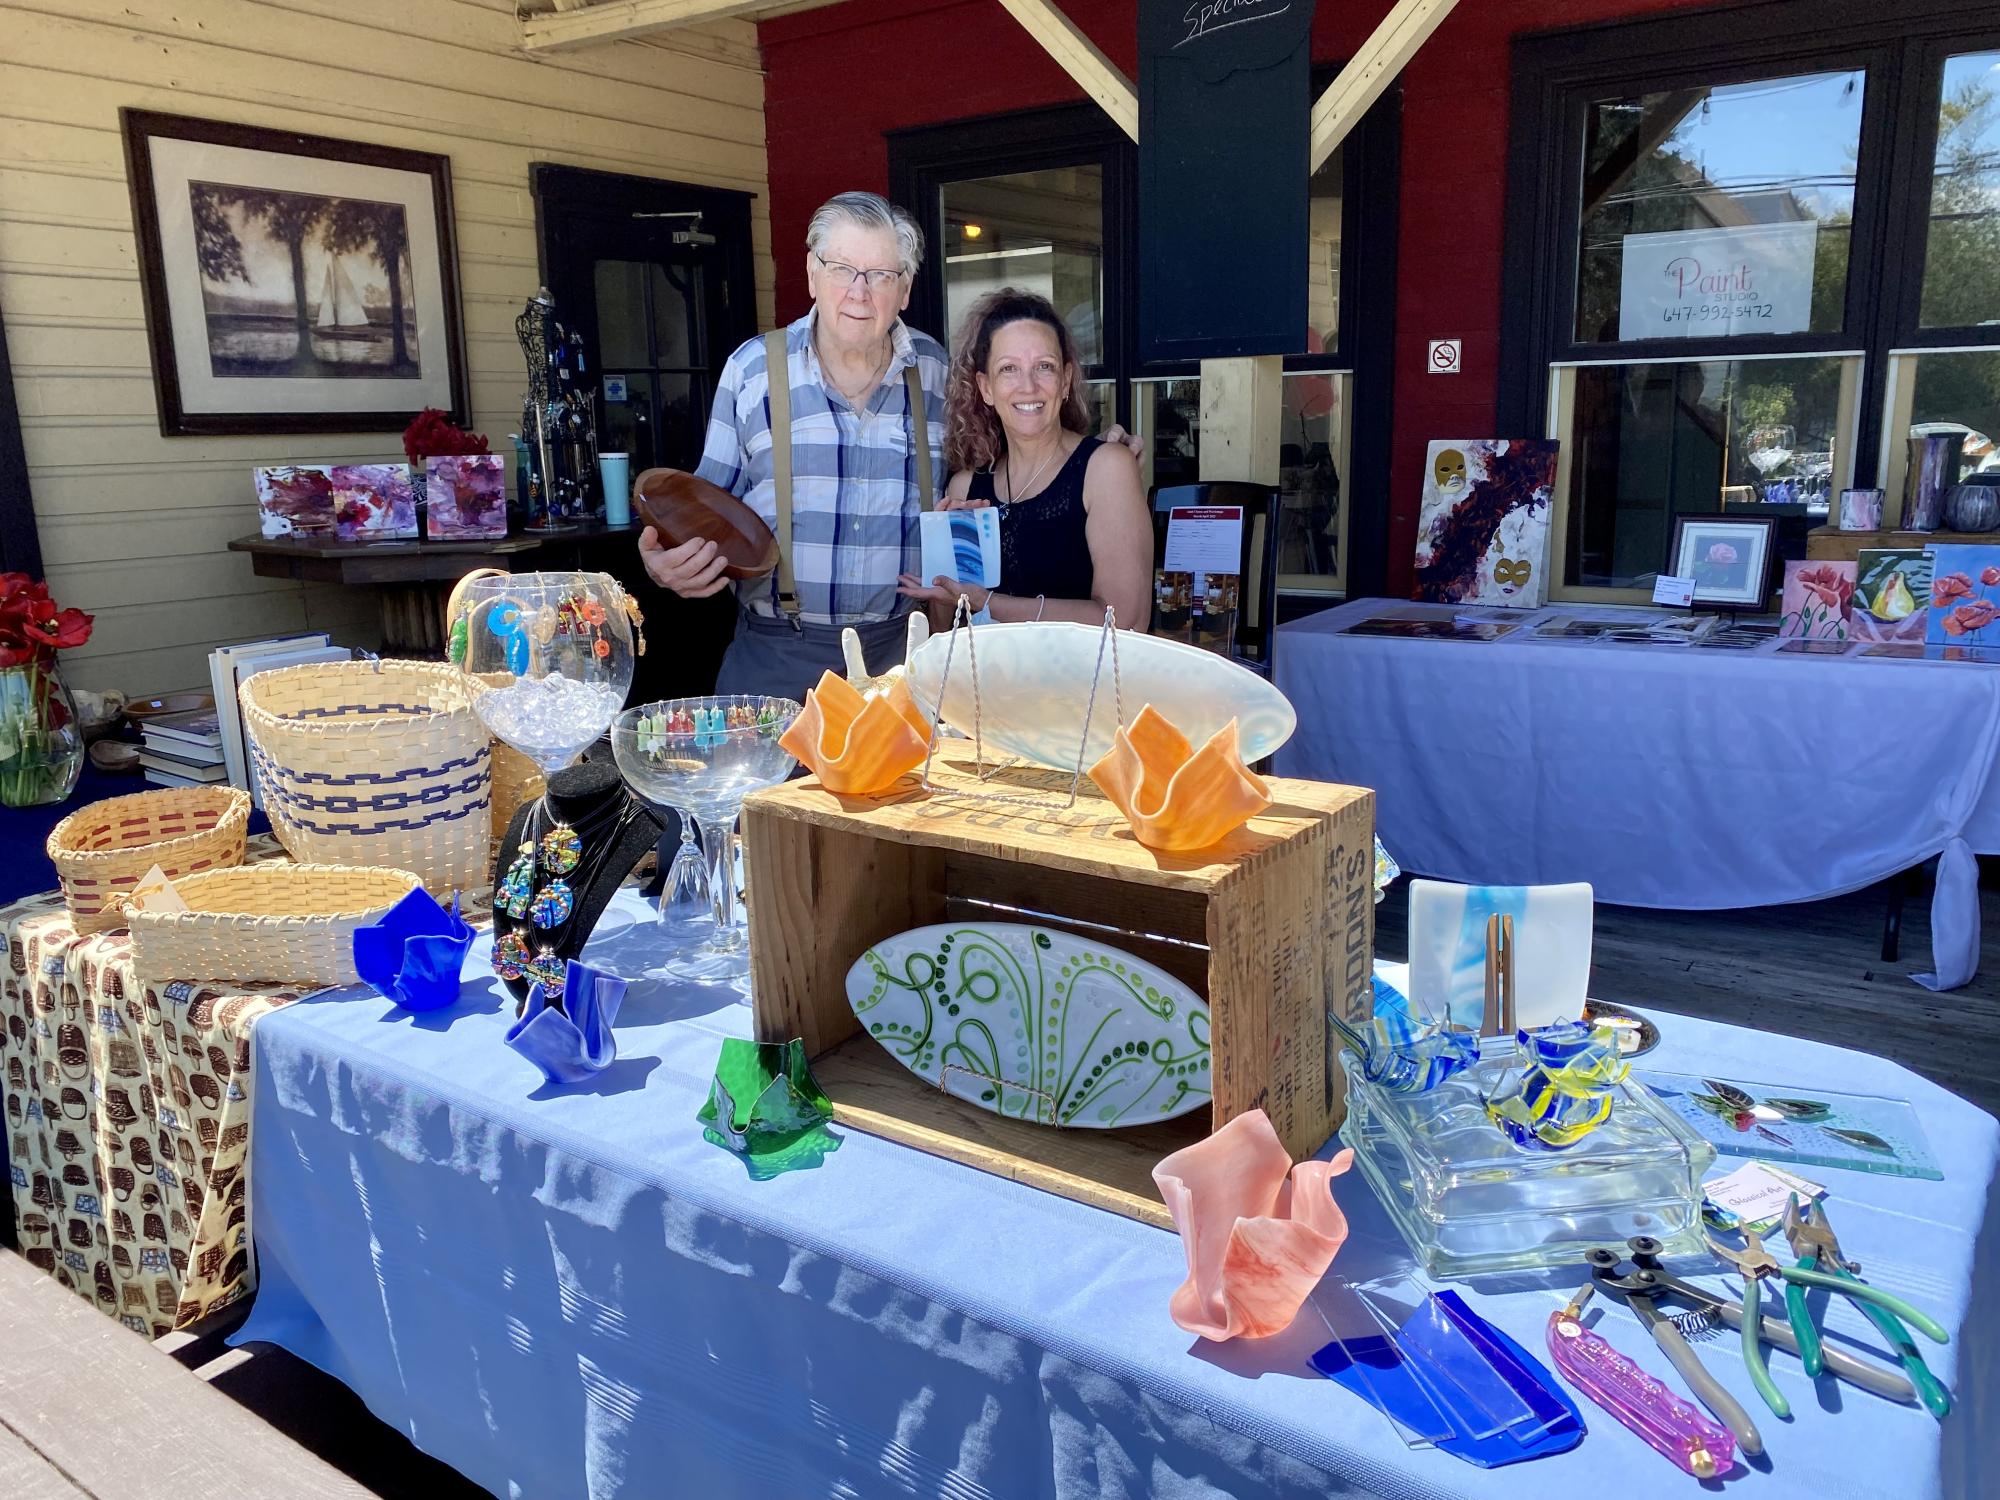 Artists from the Olde Mill Art Gallery and Shoppe standing behind a table filled with art for sale